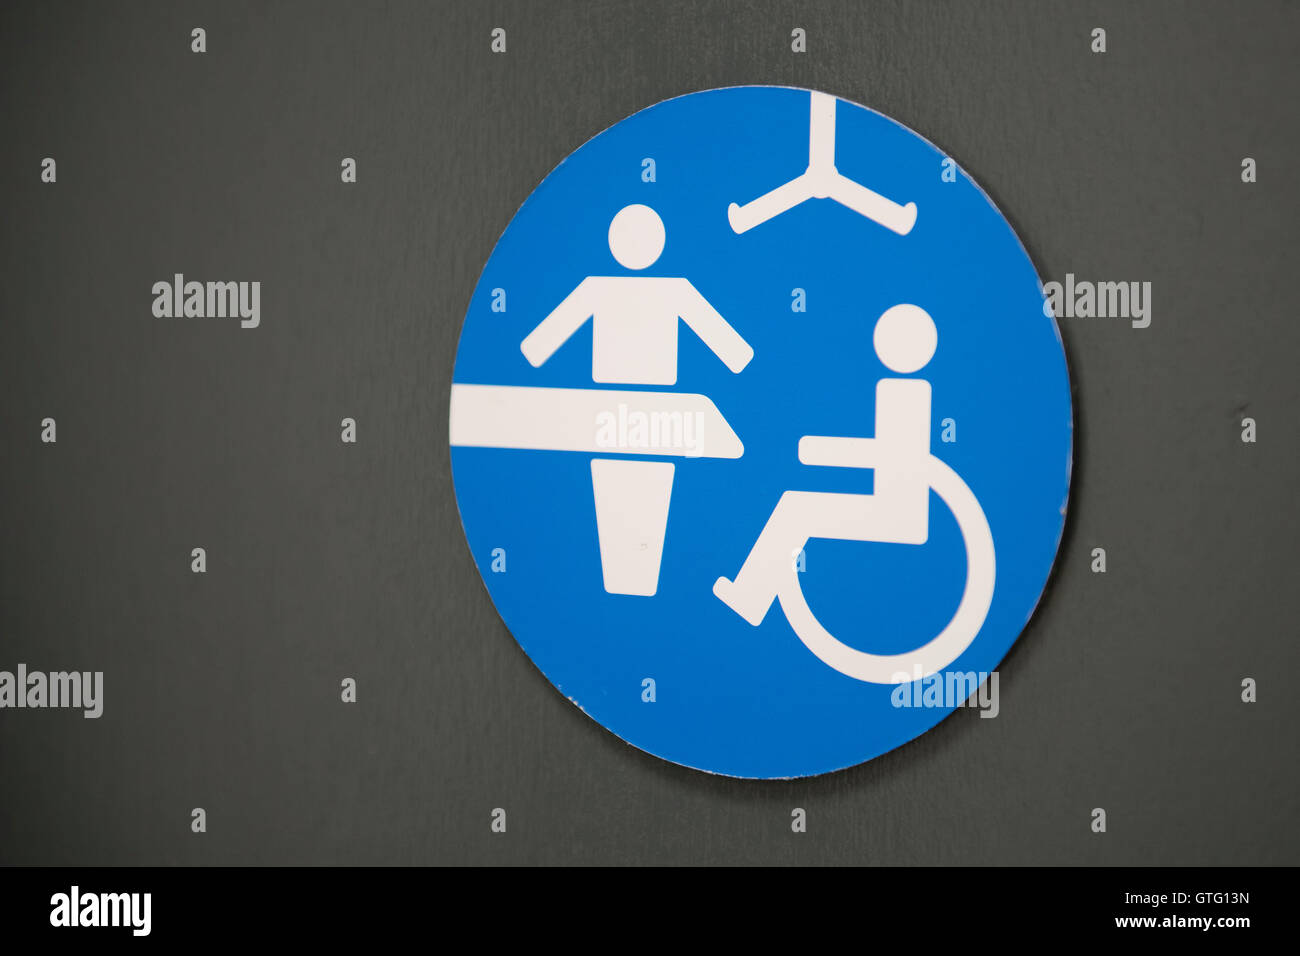 Disabled toilet and baby changing facilities in a public toilet. Stock Photo